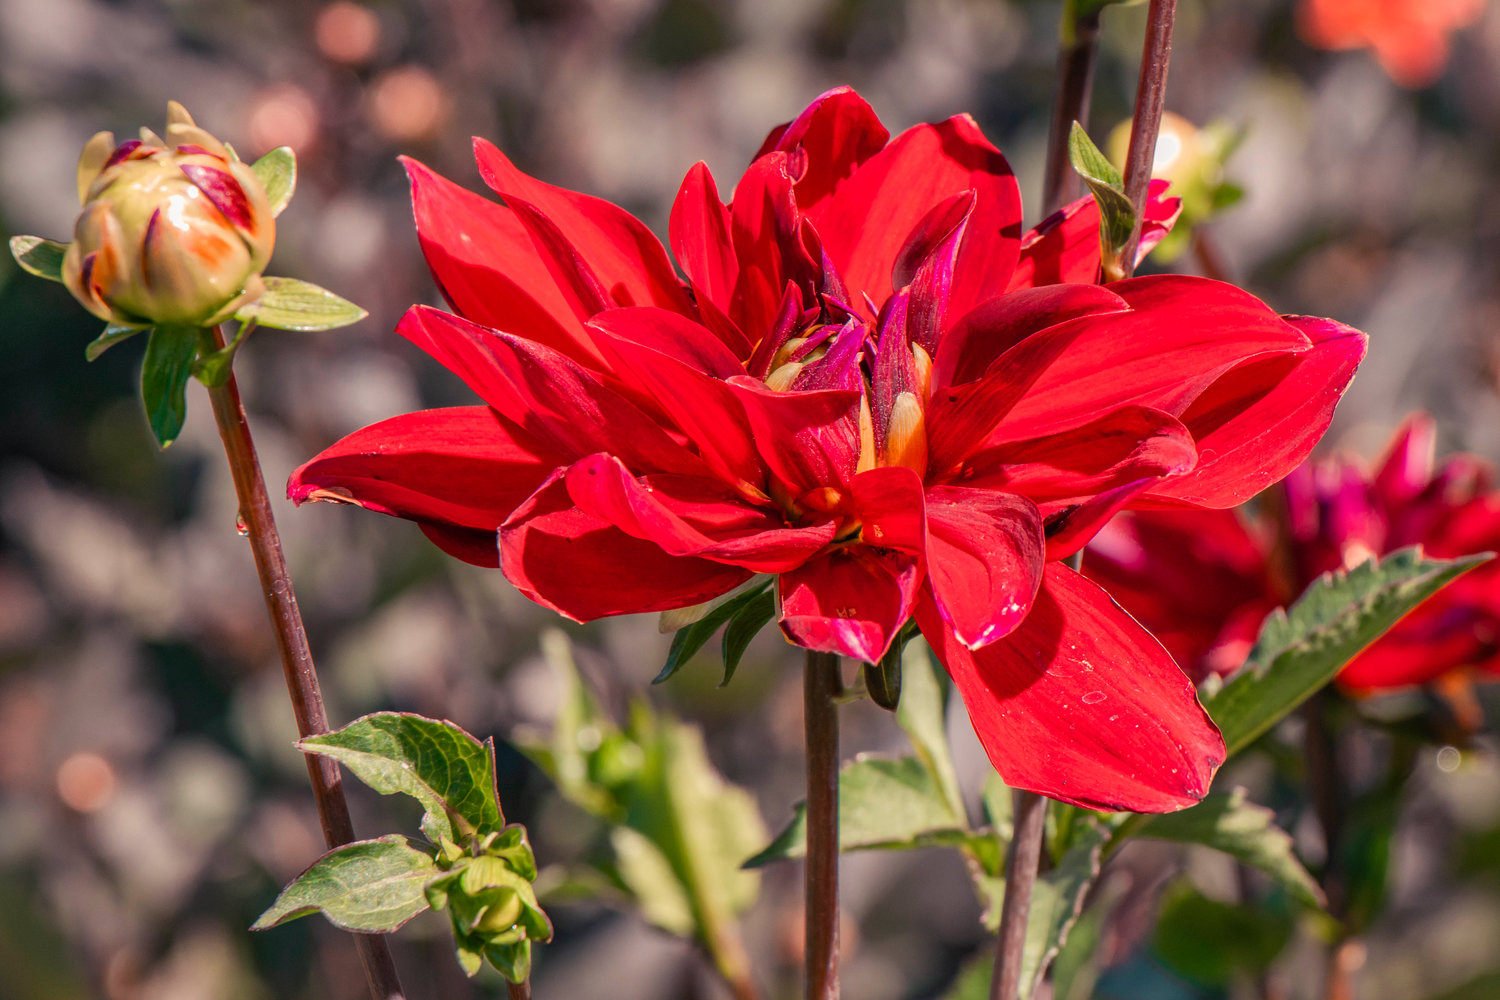 A blooming Dahlia flower basks in the sun at Foggy 48 Farms in Rochester on Tuesday.